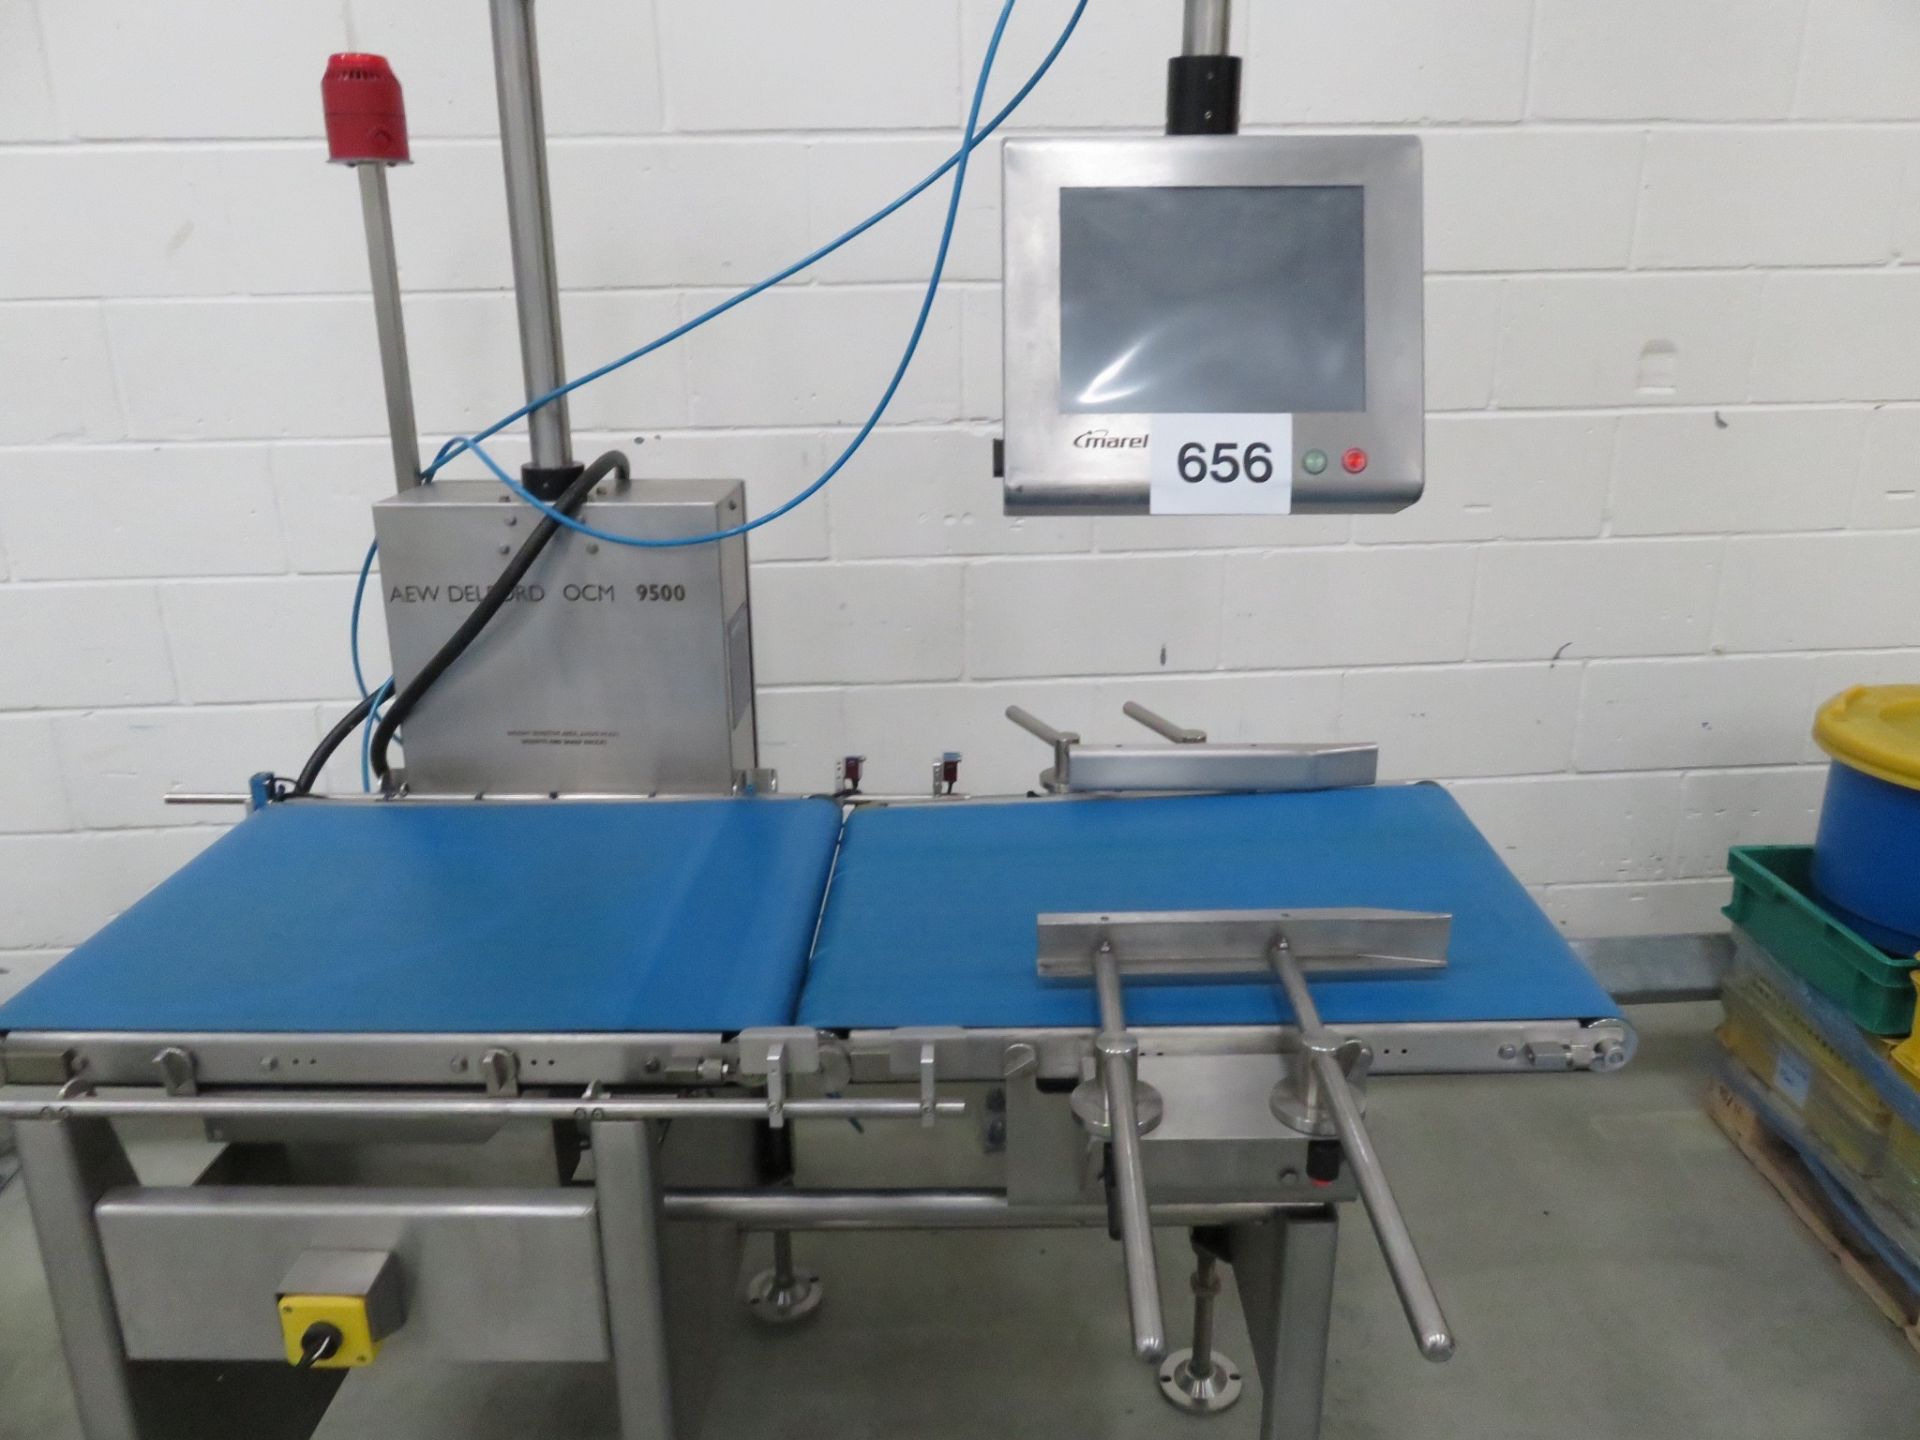 AEW Delford OCM 9500 Marel Check Weigh, price labeller for boxes/cartons. Lift out charge £30